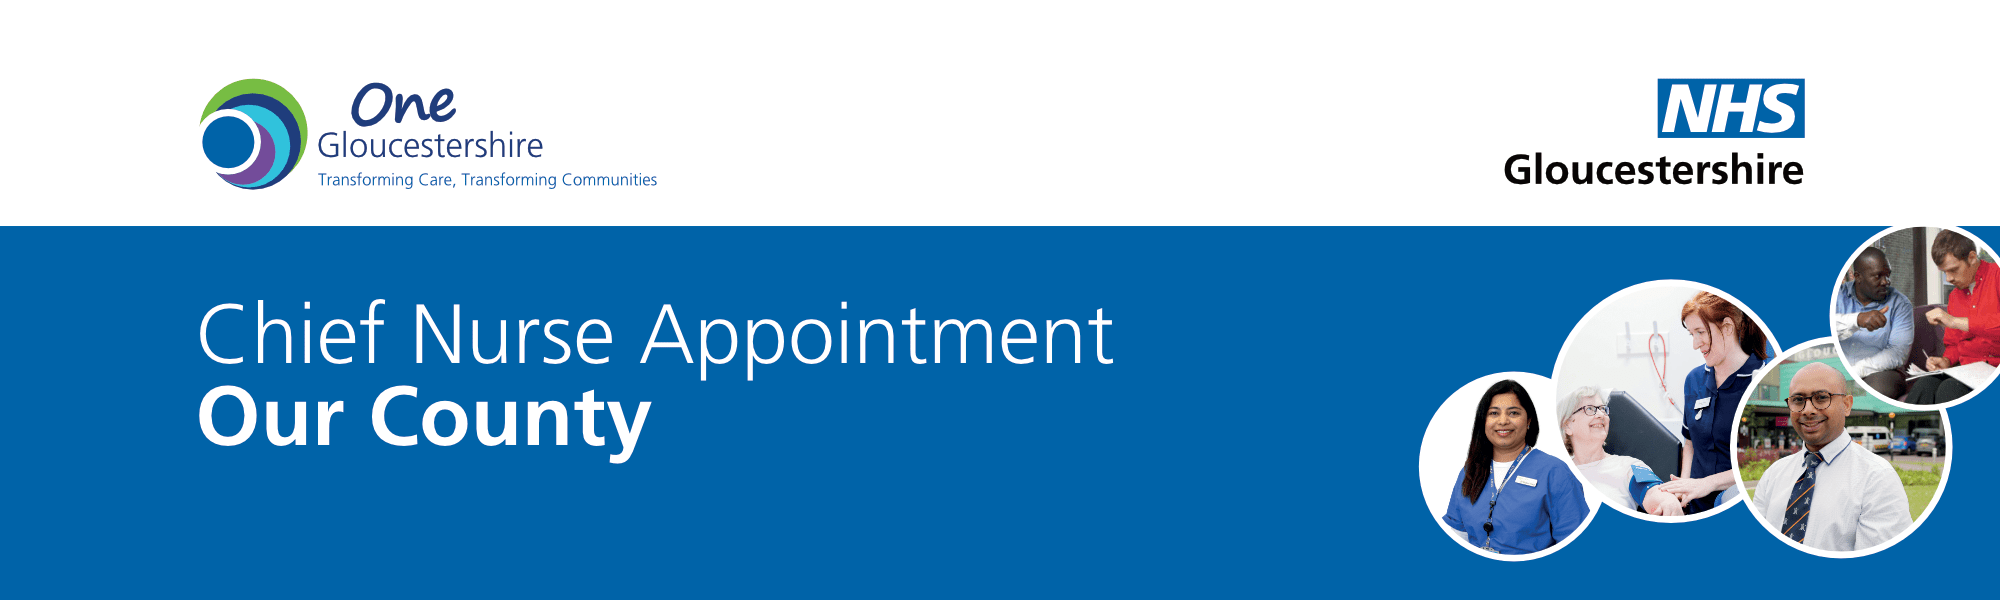 Chief Nurse Appointment - Our County